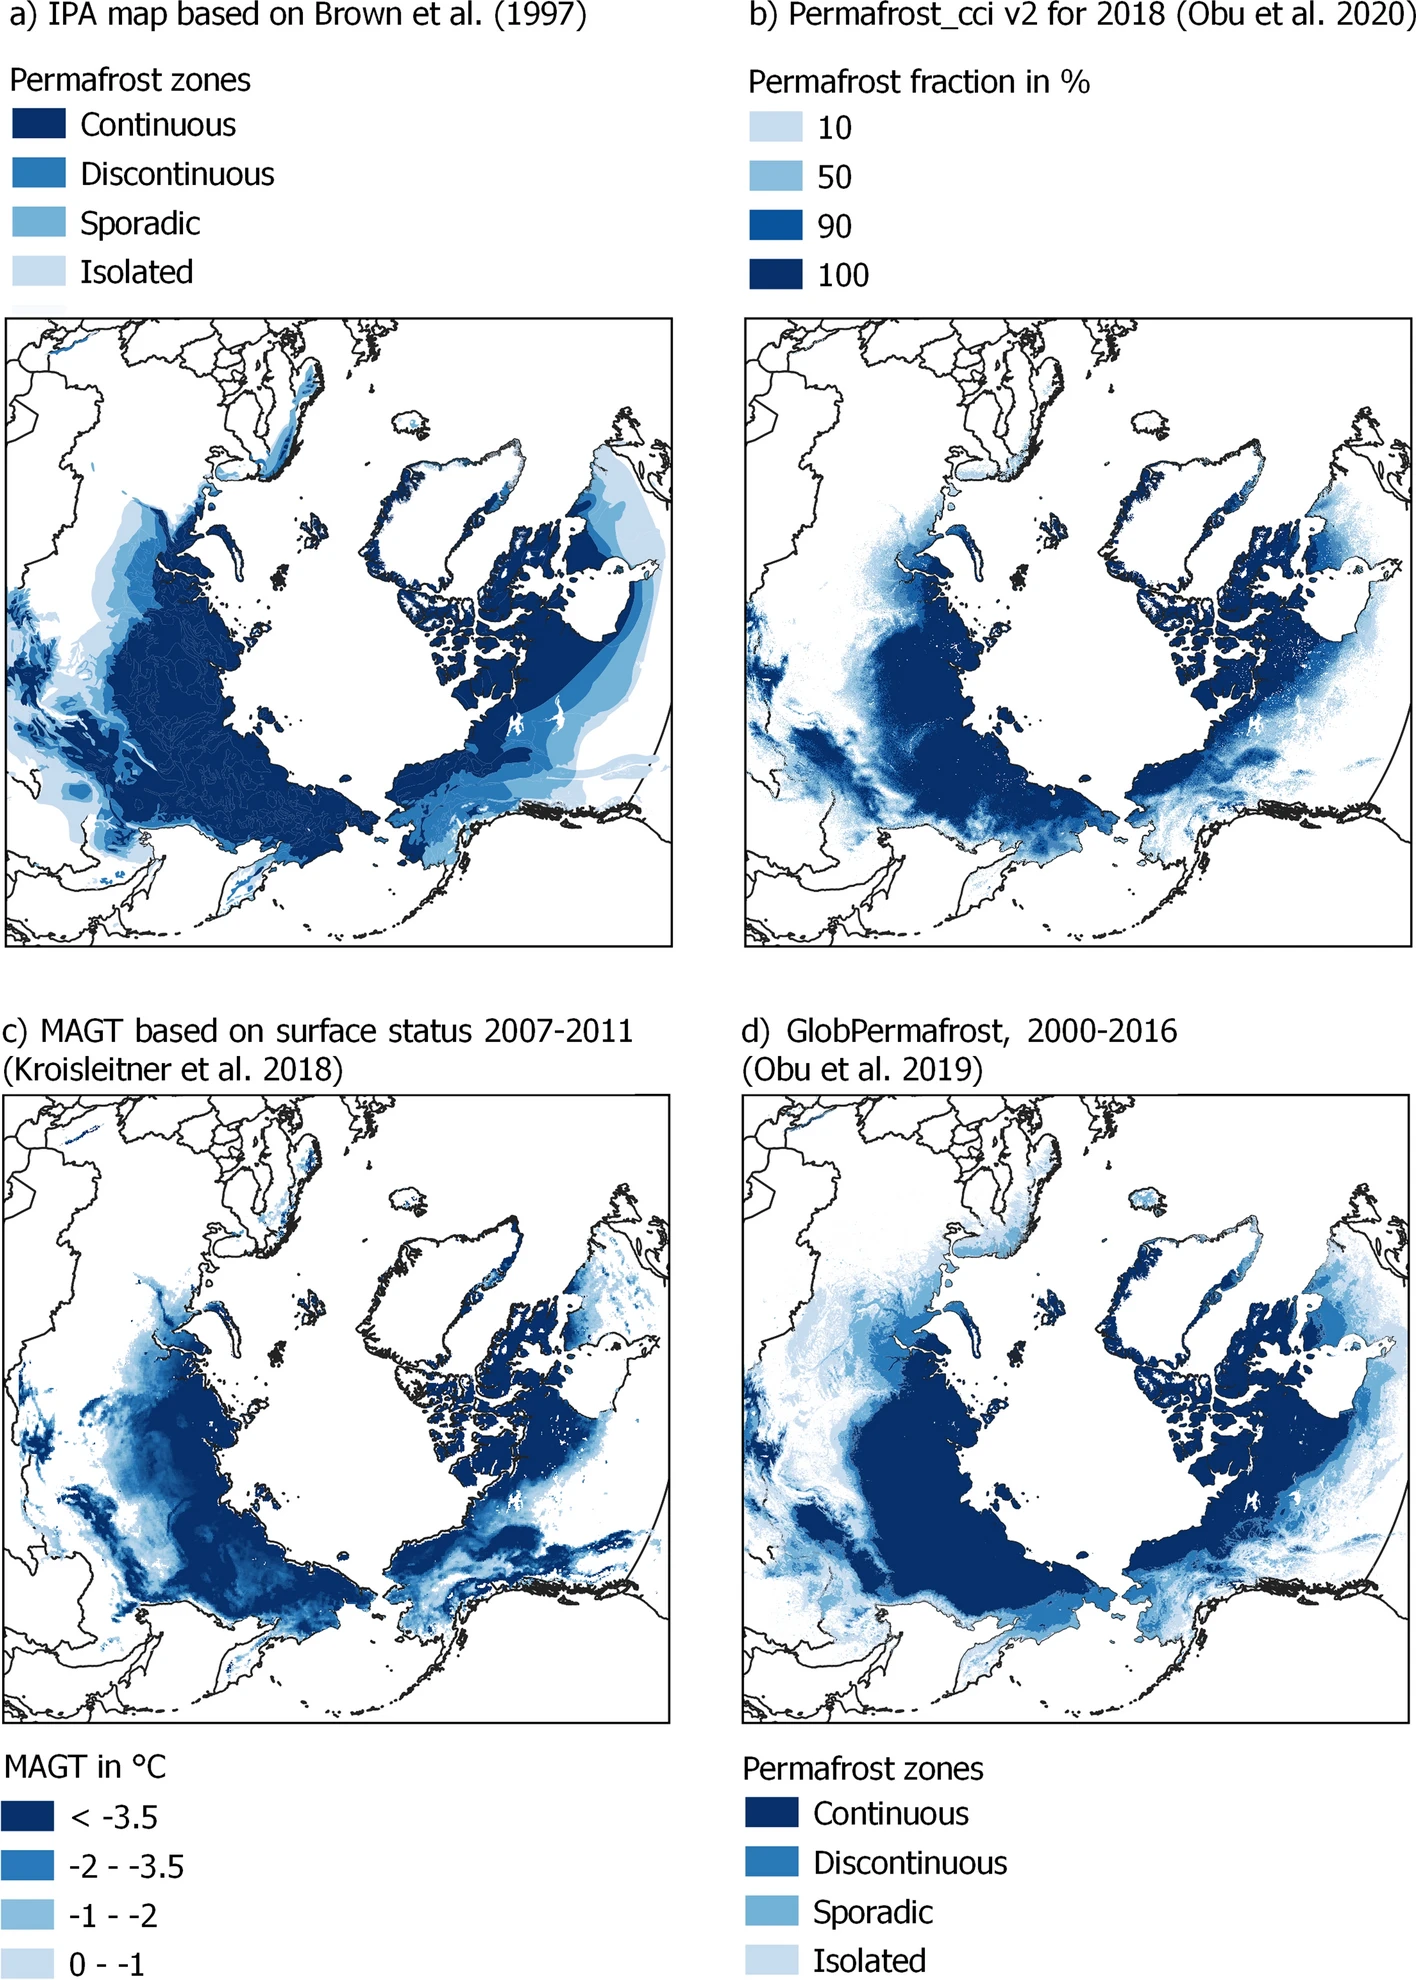 Circumpolar representation of permafrost: a permafrost zones based on traditional mapping (Brown et al. 1997), b Transient modelling of permafrost fraction using satellite-derived landsurface temperature representing a specific year (Obu et al. 2021b), c